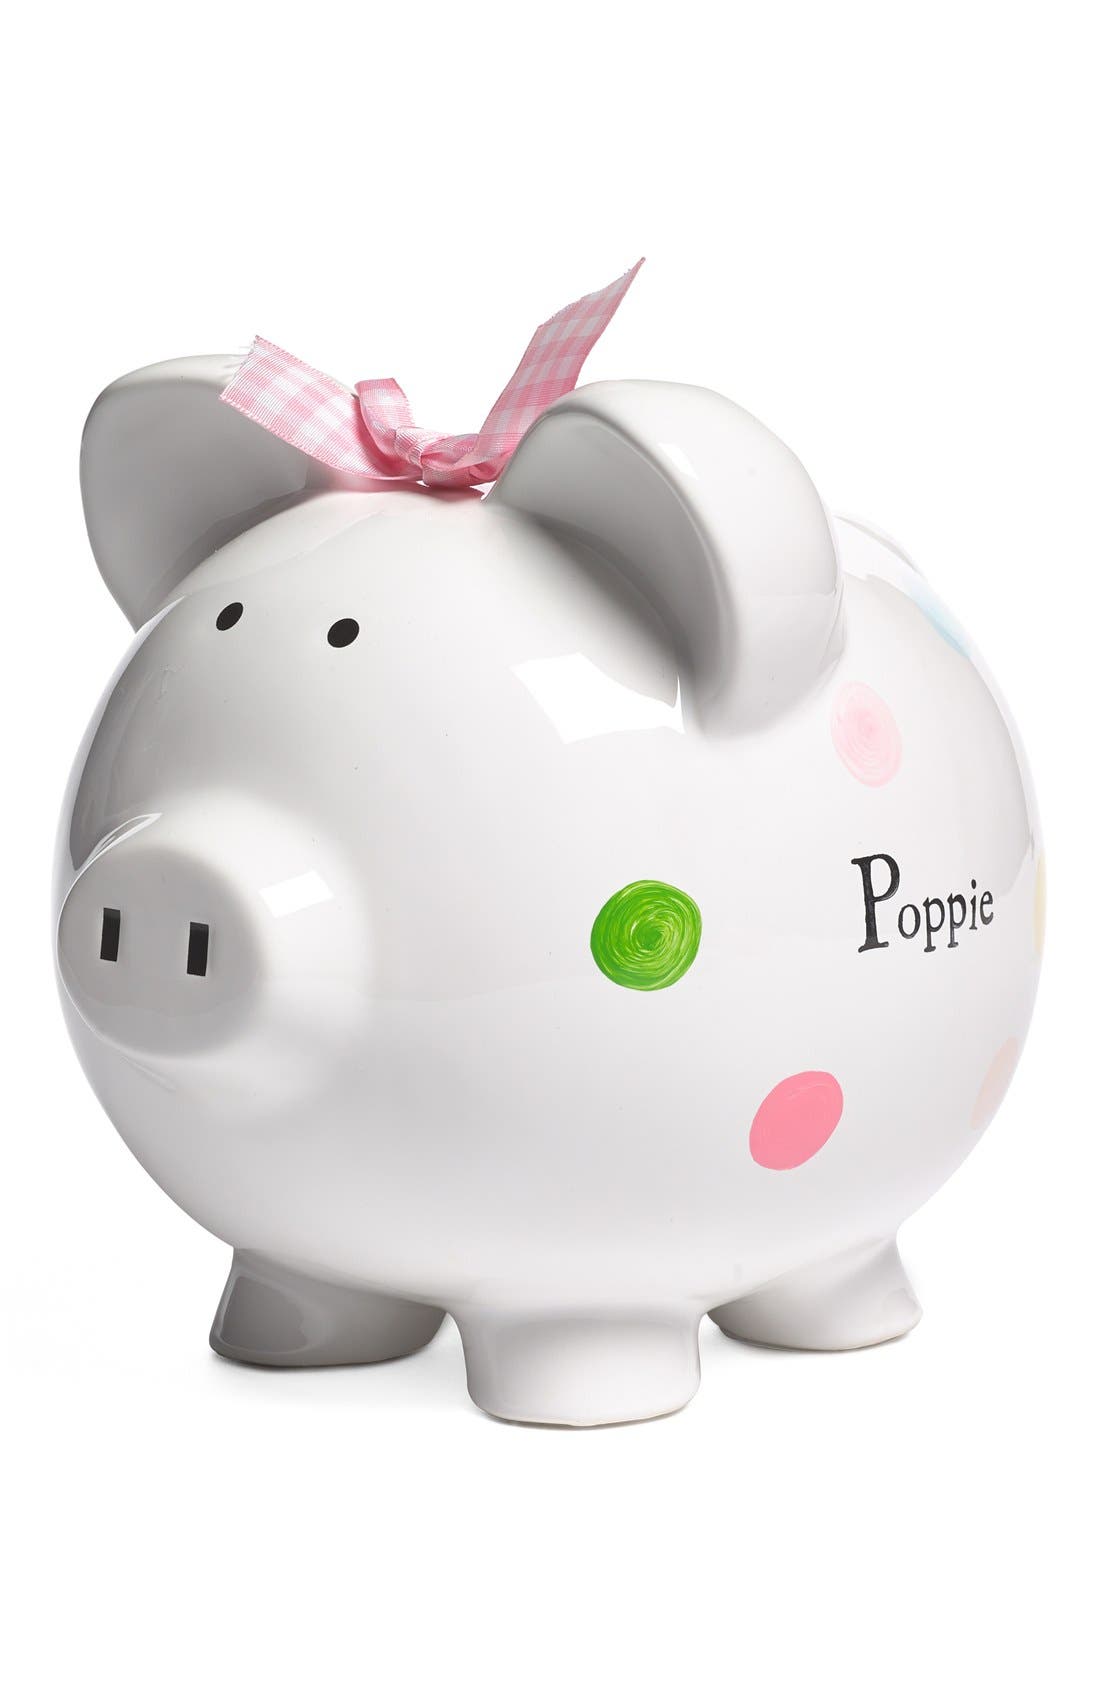 personalized piggy banks